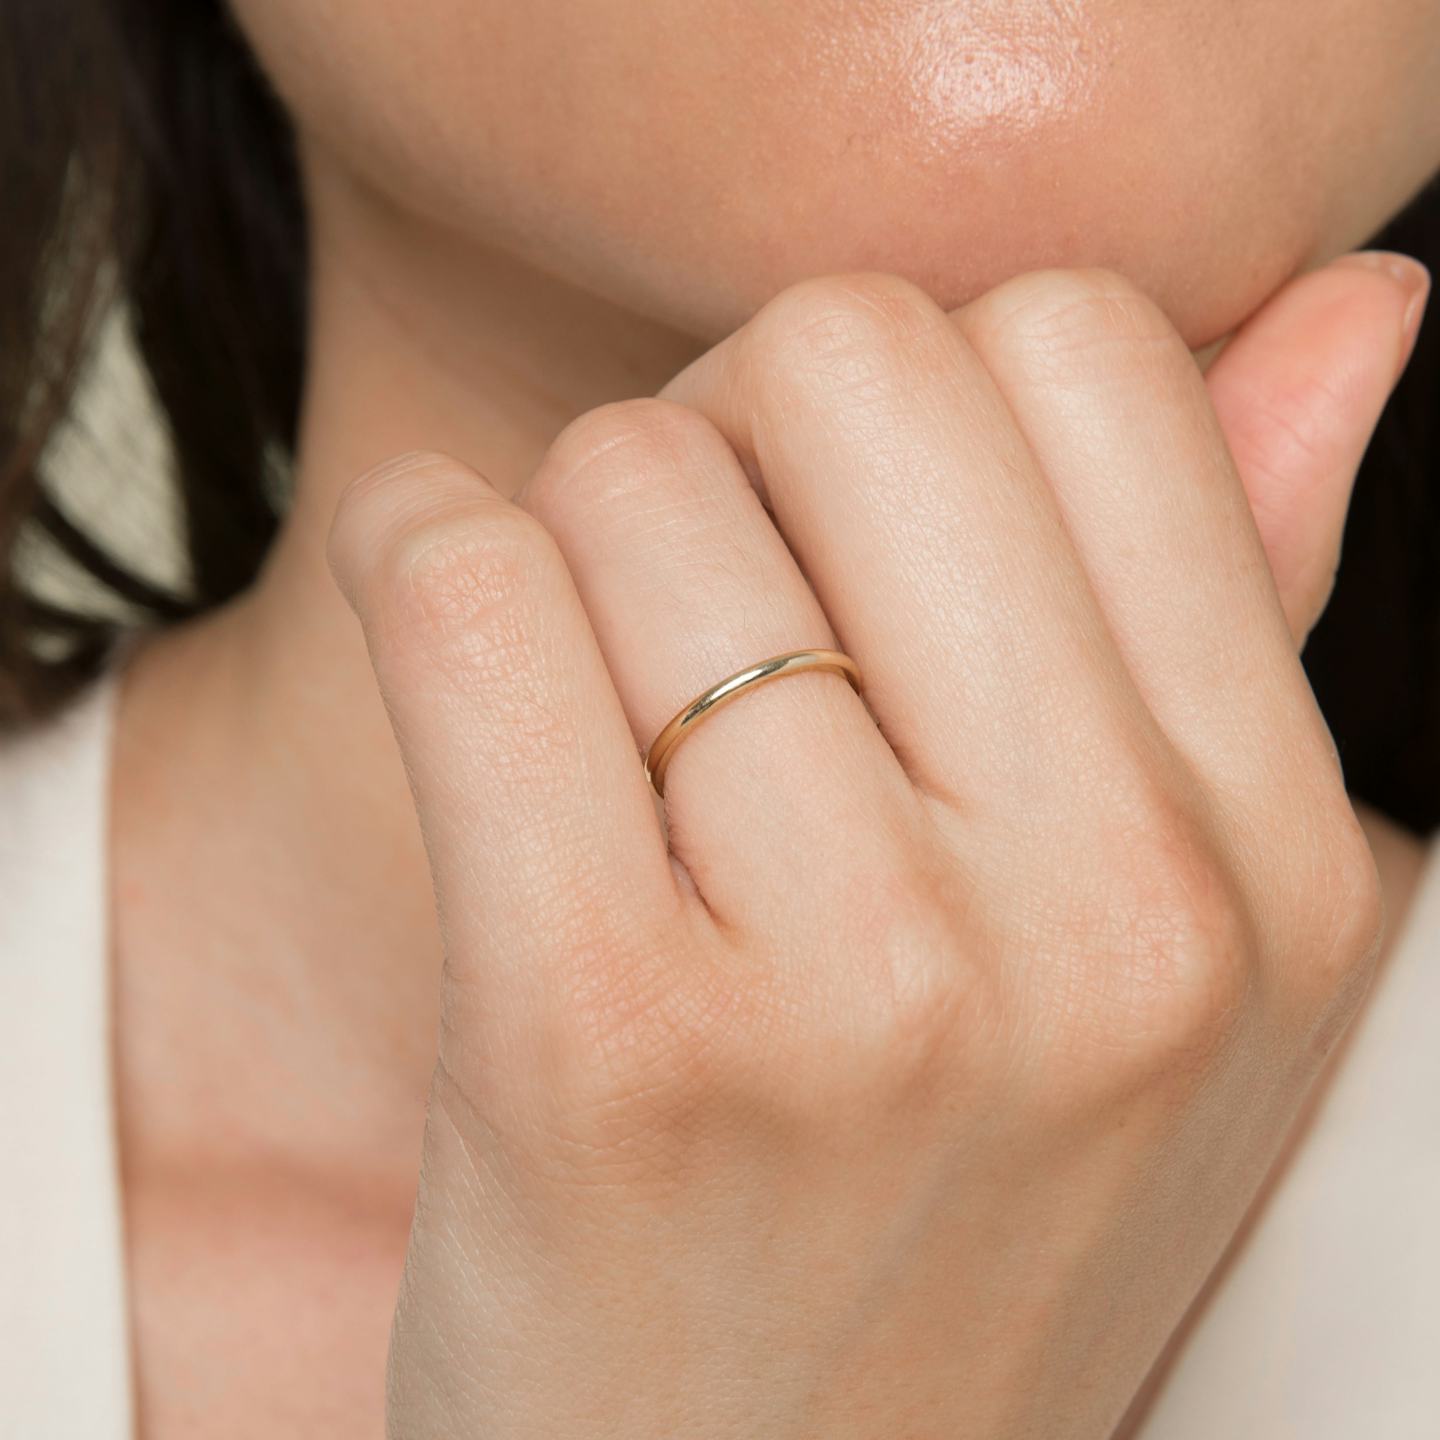 The Round Ehering | 14k | 14k Roségold | Ringbreite: Small - 1.5mm